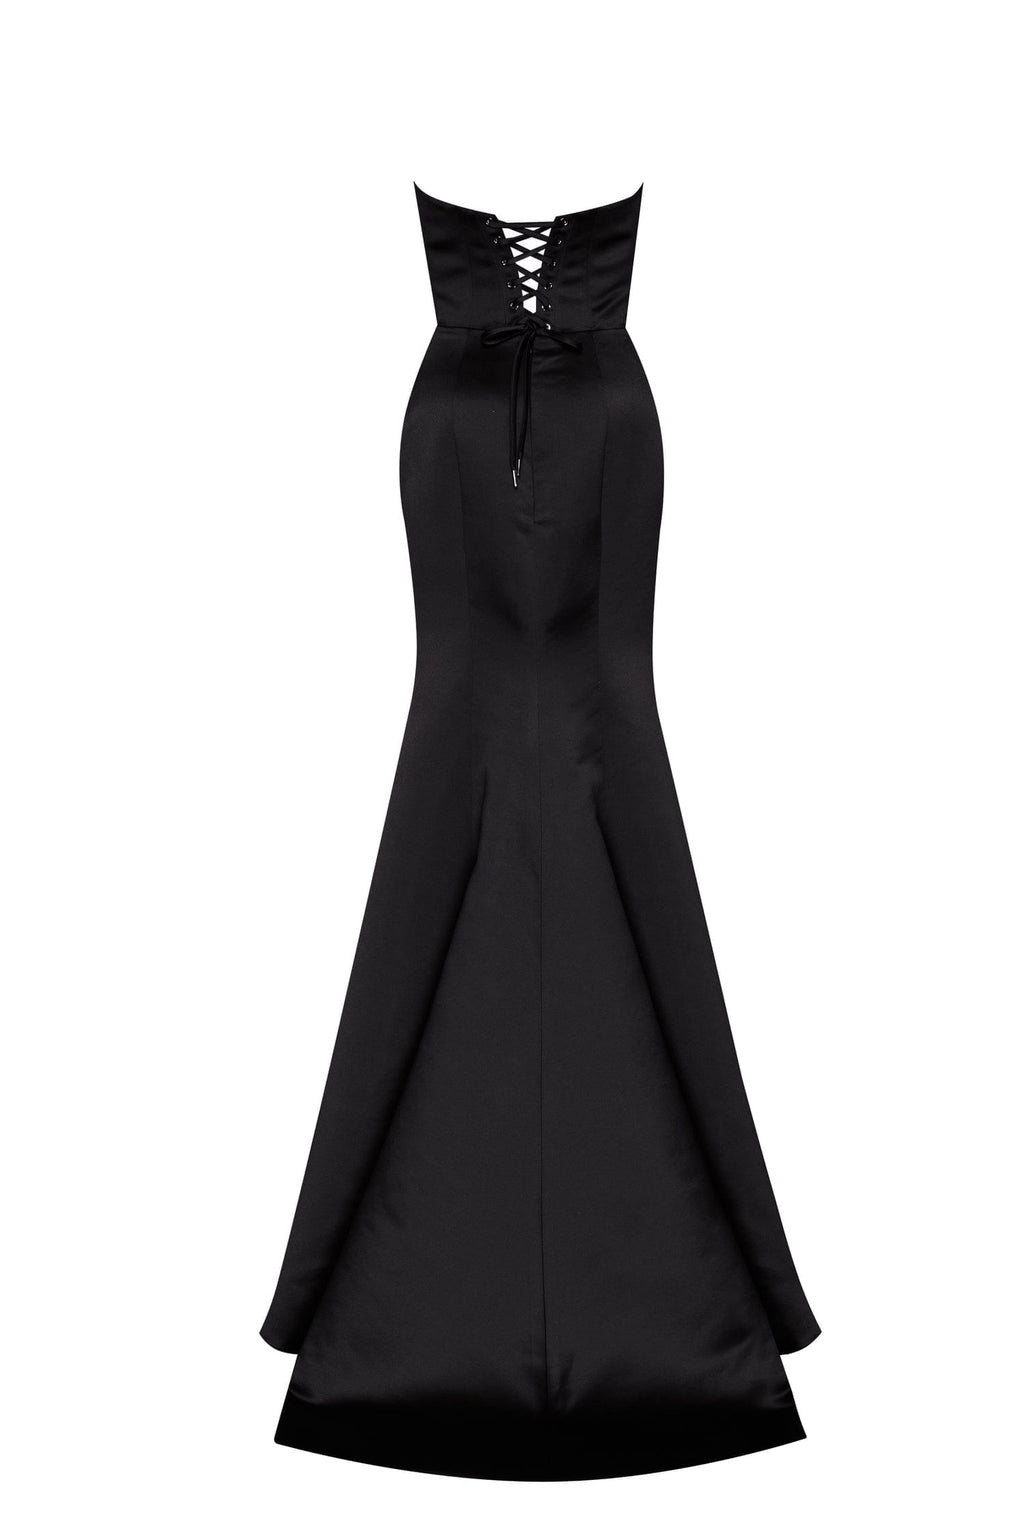 Eightree Modern High Split Evening Party Gowns Mermaid Black/White